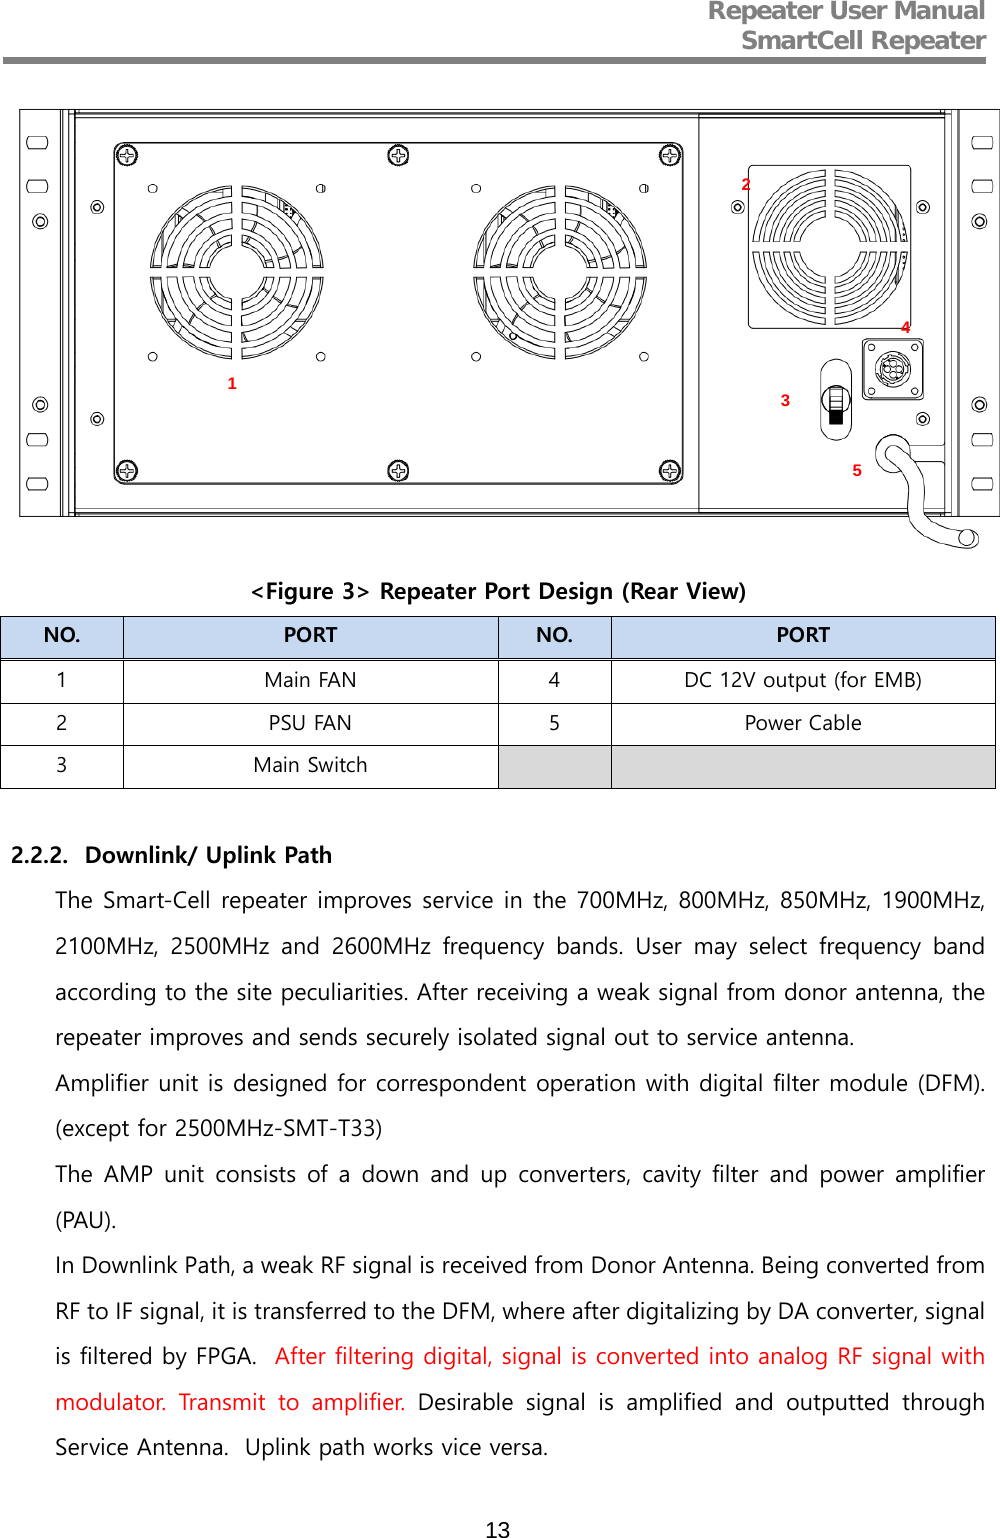 Repeater User Manual  SmartCell Repeater   13  &lt;Figure 3&gt; Repeater Port Design (Rear View) NO. PORT NO. PORT 1  Main FAN  4  DC 12V output (for EMB) 2  PSU FAN  5  Power Cable 3  Main Switch      2.2.2. Downlink/ Uplink Path The Smart-Cell repeater improves service in the 700MHz, 800MHz, 850MHz, 1900MHz, 2100MHz, 2500MHz and 2600MHz frequency bands. User may select frequency band according to the site peculiarities. After receiving a weak signal from donor antenna, the repeater improves and sends securely isolated signal out to service antenna. Amplifier unit is designed for correspondent operation with digital filter module (DFM). (except for 2500MHz-SMT-T33) The AMP unit consists of a down and up converters, cavity filter and power amplifier (PAU). In Downlink Path, a weak RF signal is received from Donor Antenna. Being converted from RF to IF signal, it is transferred to the DFM, where after digitalizing by DA converter, signal is filtered by FPGA.  After filtering digital, signal is converted into analog RF signal with modulator.  Transmit to amplifier. Desirable signal is amplified and outputted through Service Antenna.  Uplink path works vice versa.  1 2 3 5 4 